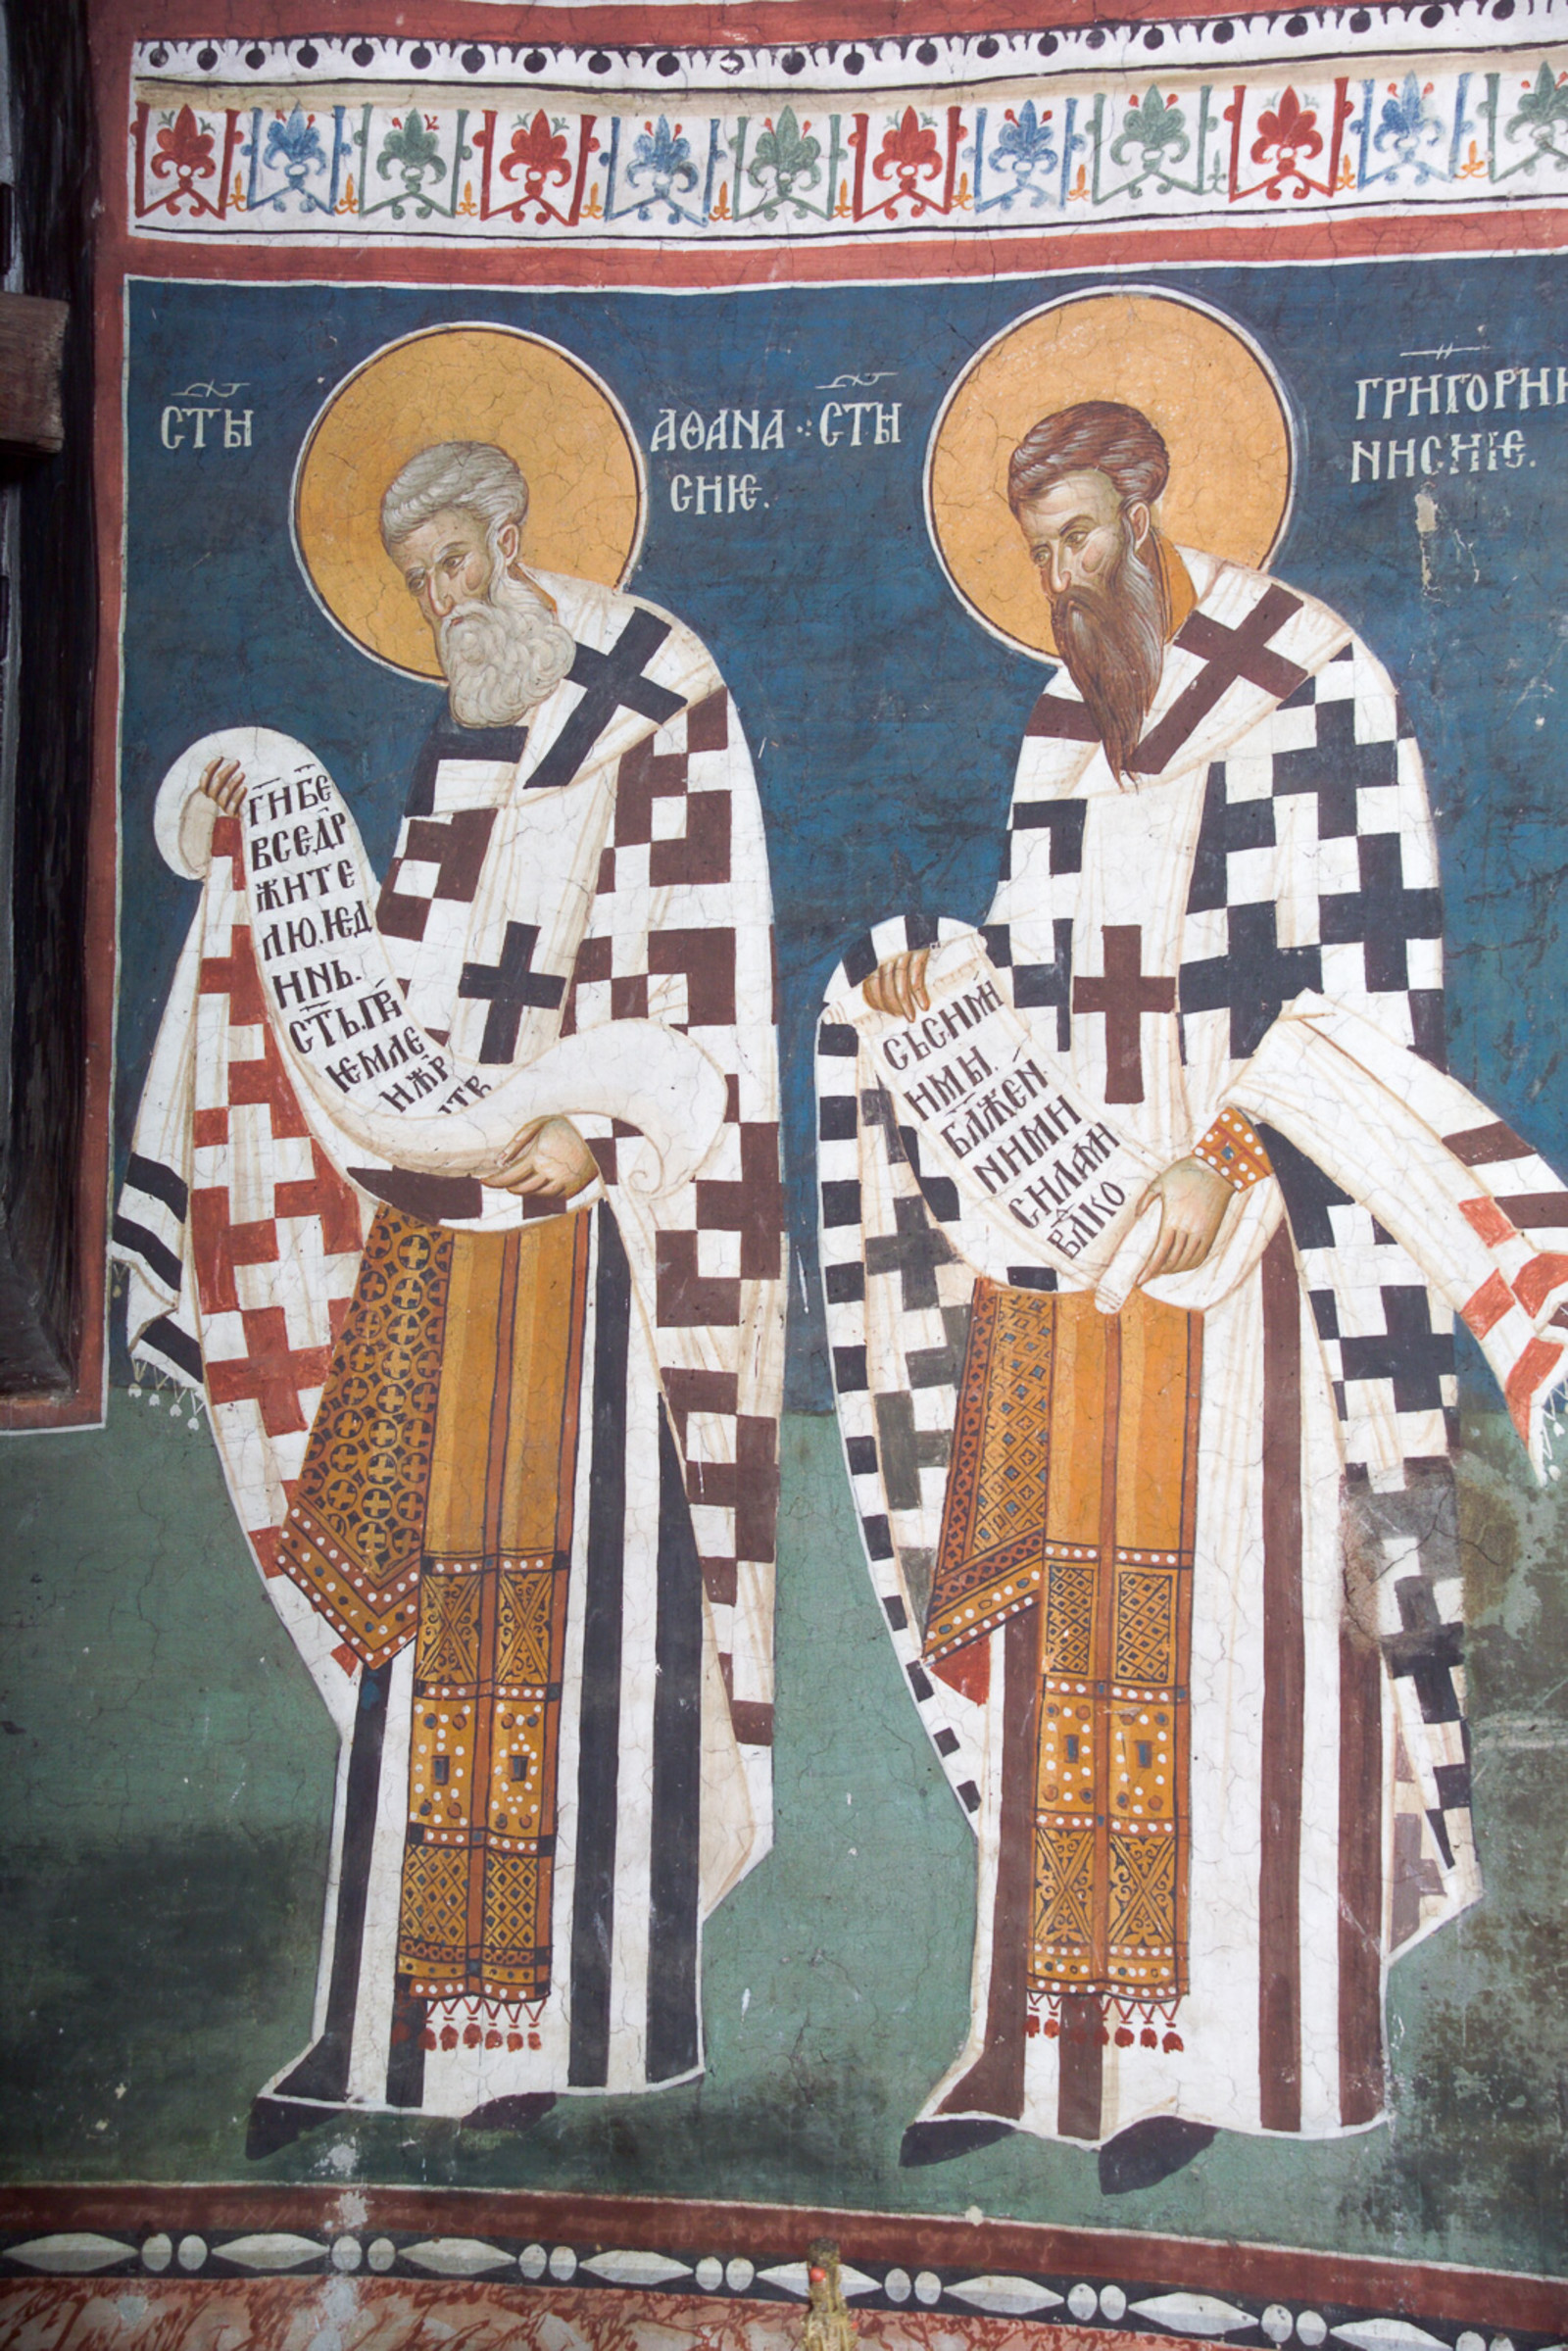 23,24 Officiating Church Fathers: St. Athanasius (left) and St. Gregory of Nyssa (right)